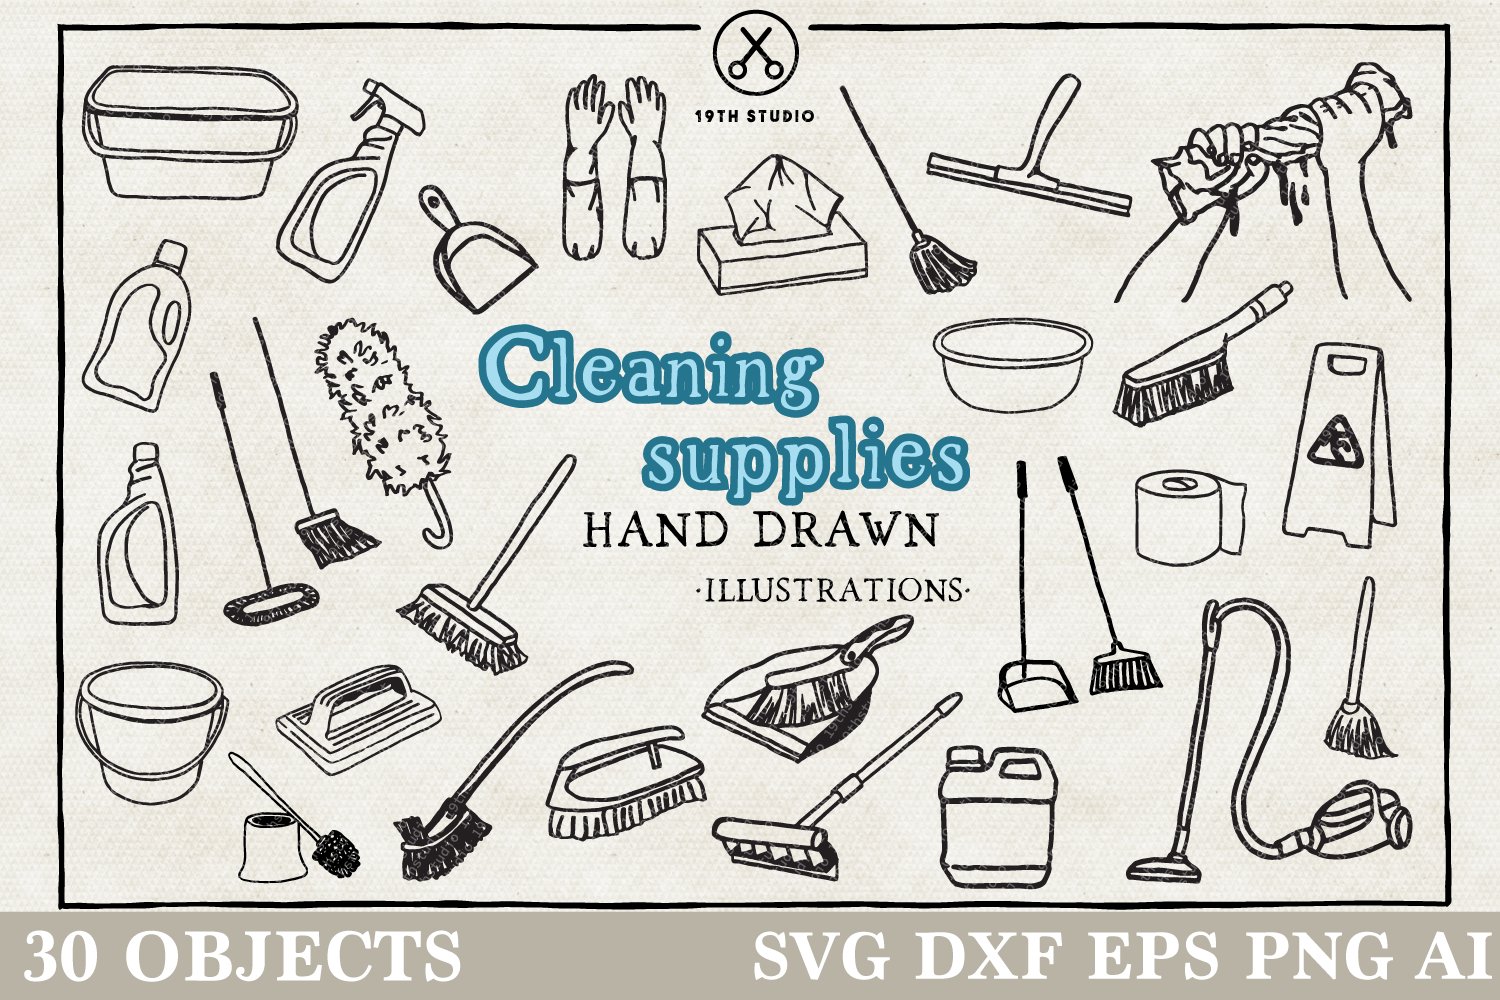 Cleaning Supplies Illustration Pack cover image.